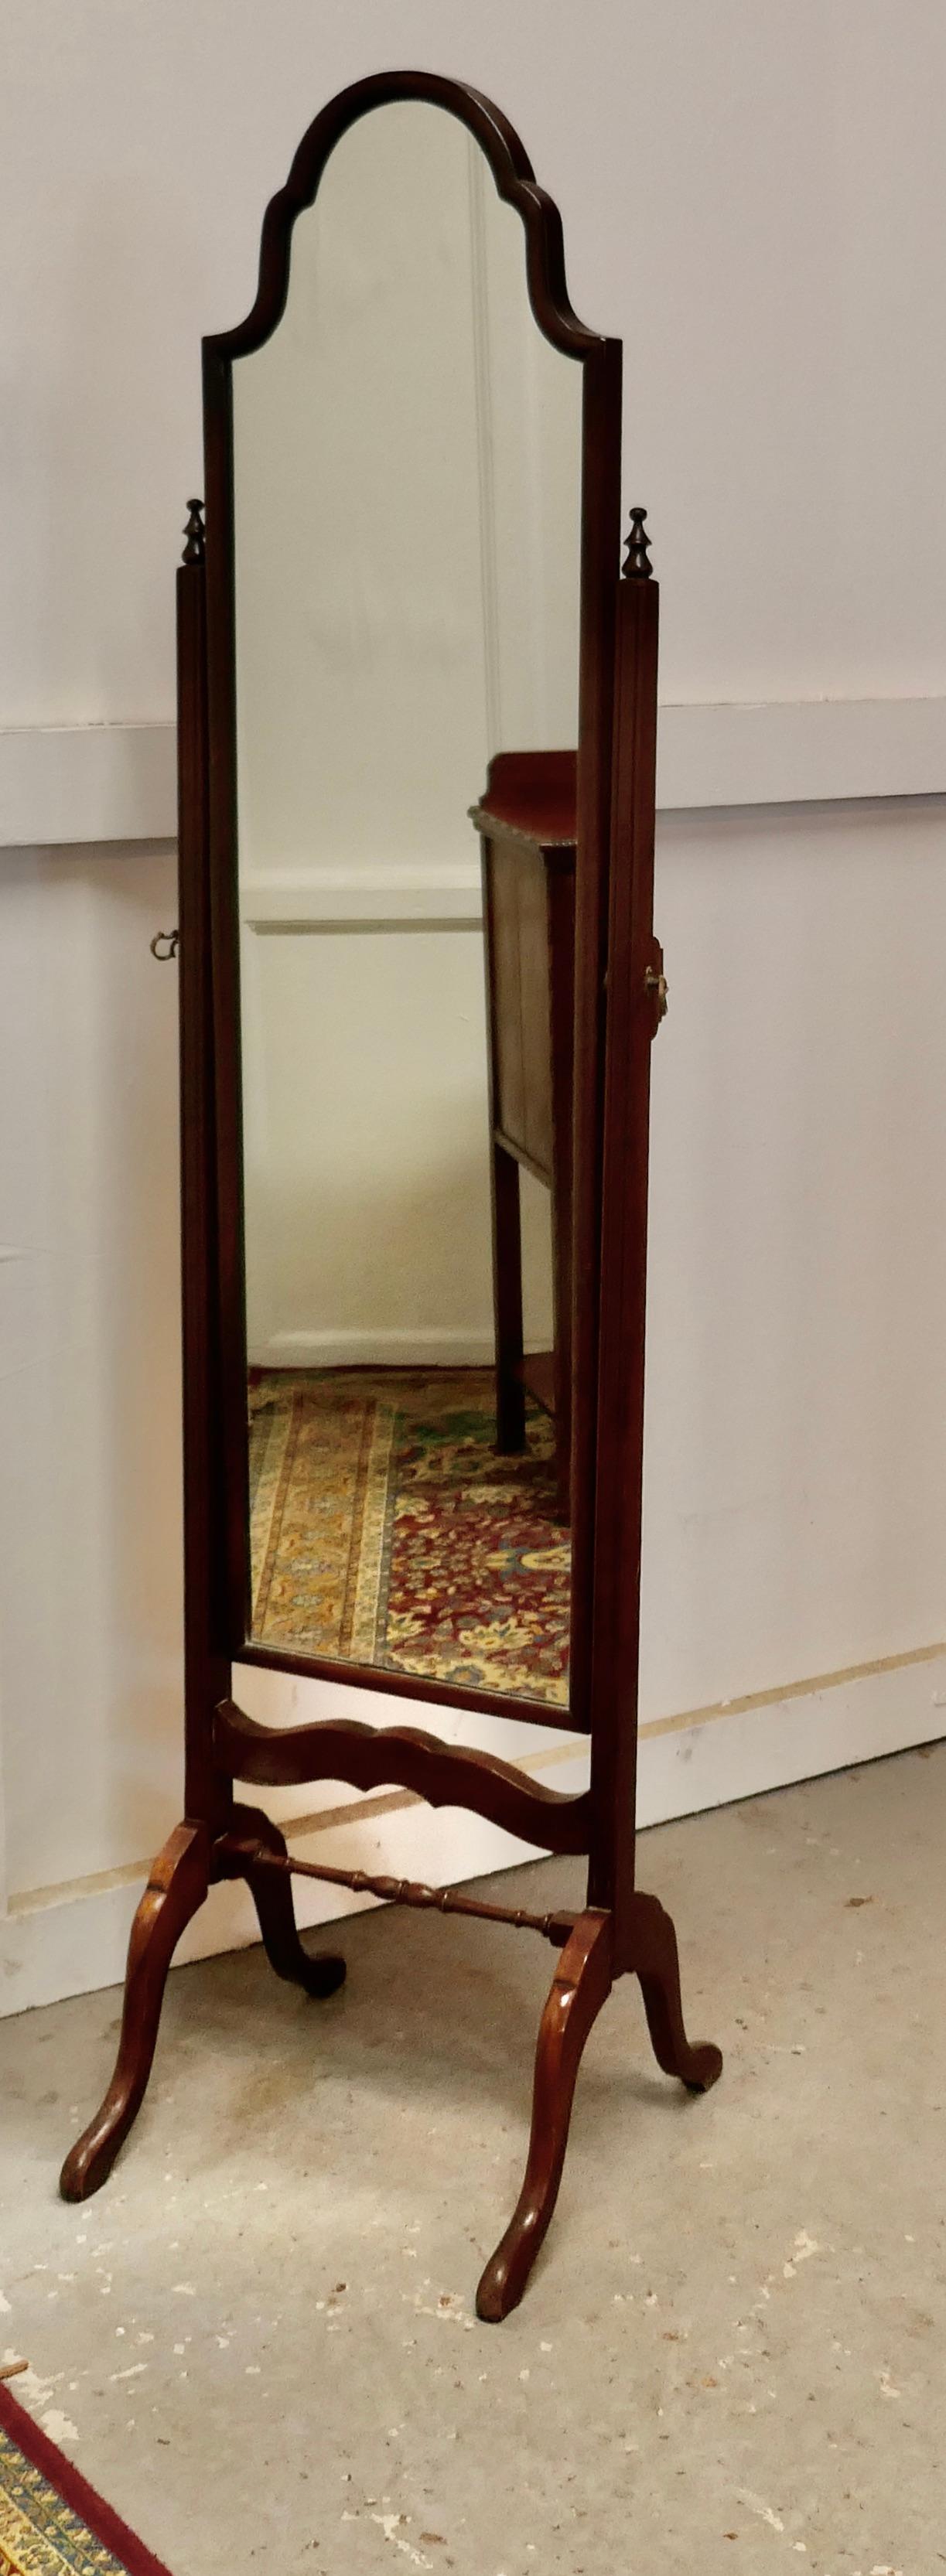 Stylish mahogany reprodux cheval mirror by Bevan & Funnell

This fine quality mirror has a Scalloped shaped top, it sits firmly in its stand and swivels for maximum advantage
The Mahogany stand has arching splayed feet with a pretty turned